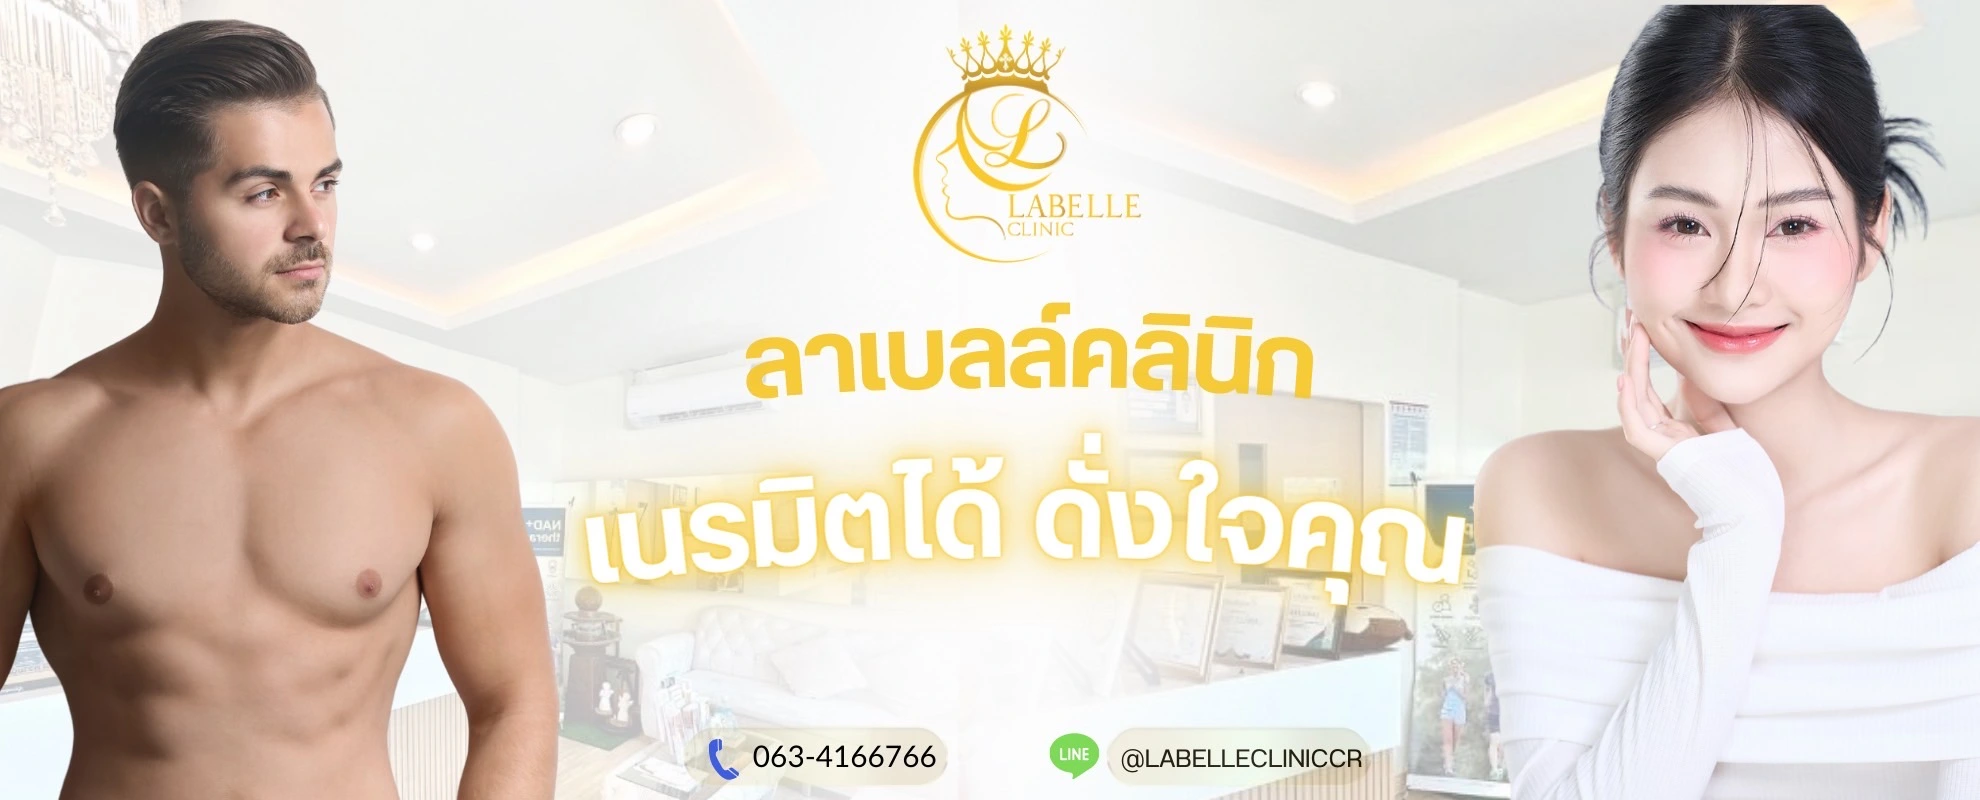 ladelle home page banner